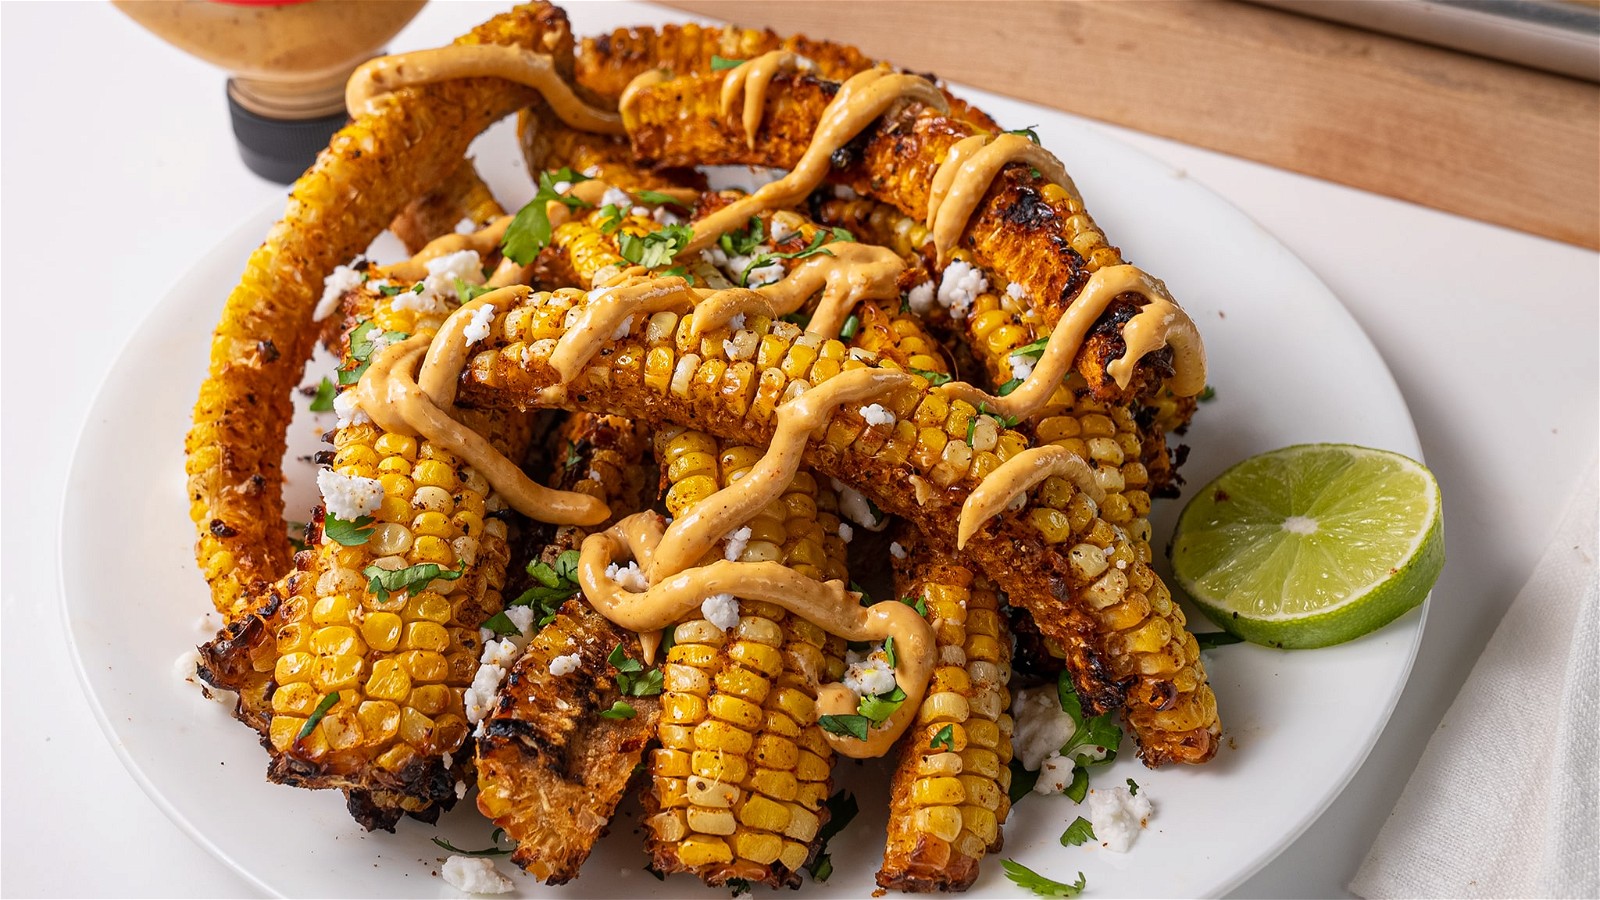 Image of Grilled Corn Ribs